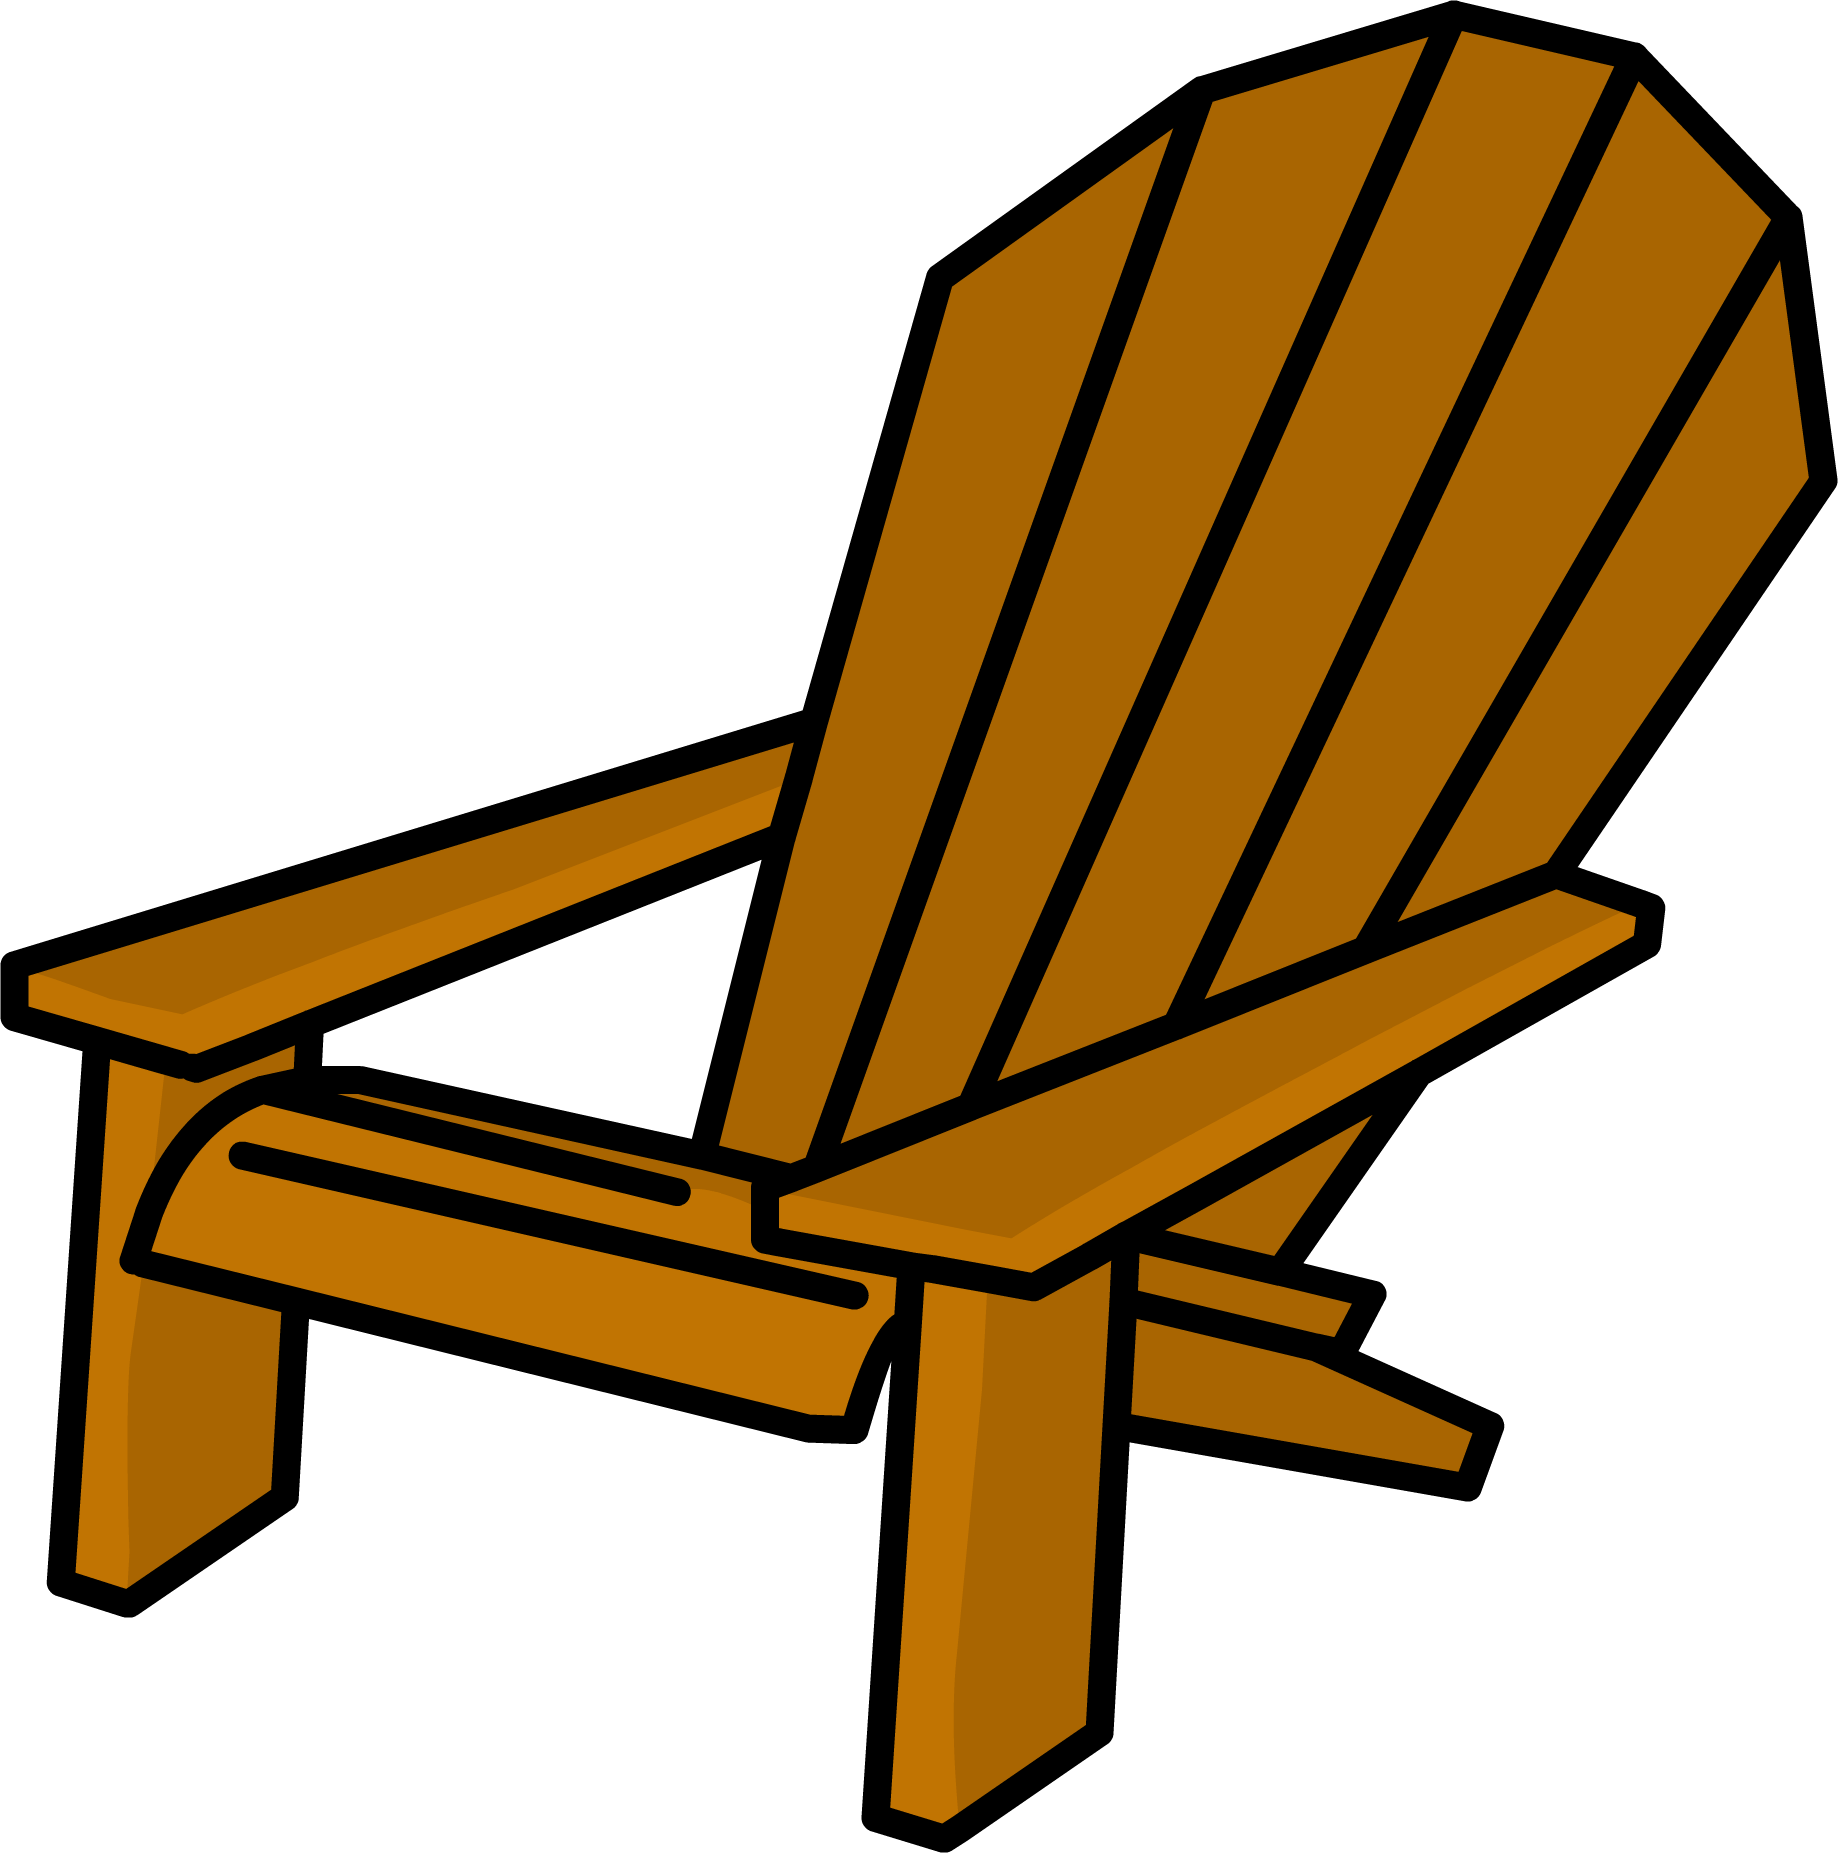 Lounging Deck Chair | Club Penguin Wiki | FANDOM powered by Wikia